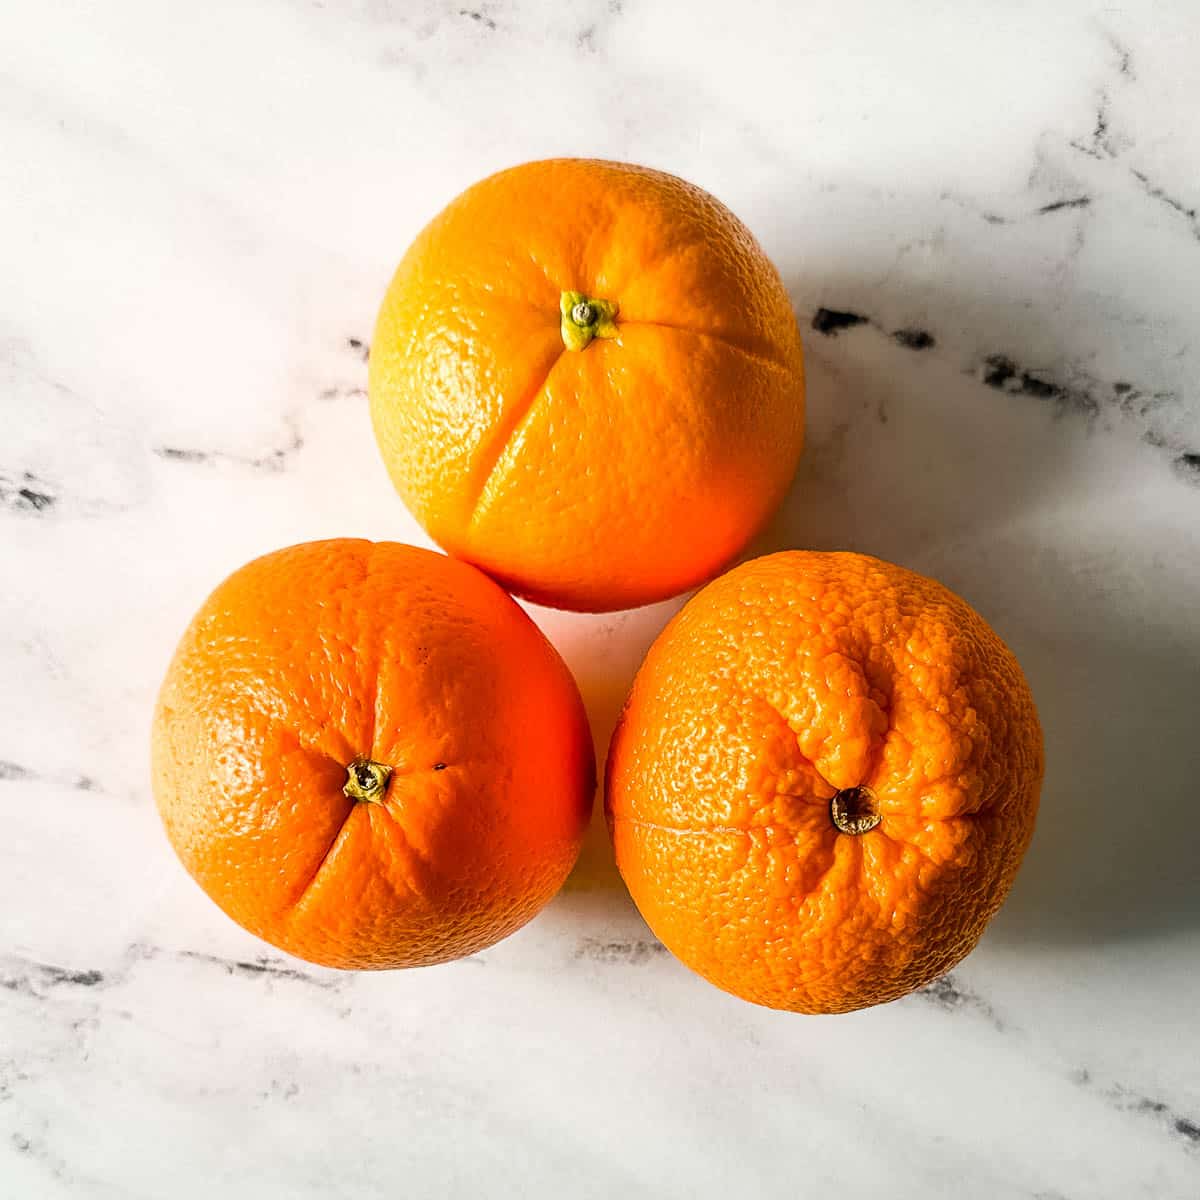 Fresh oranges on a white marble counter.